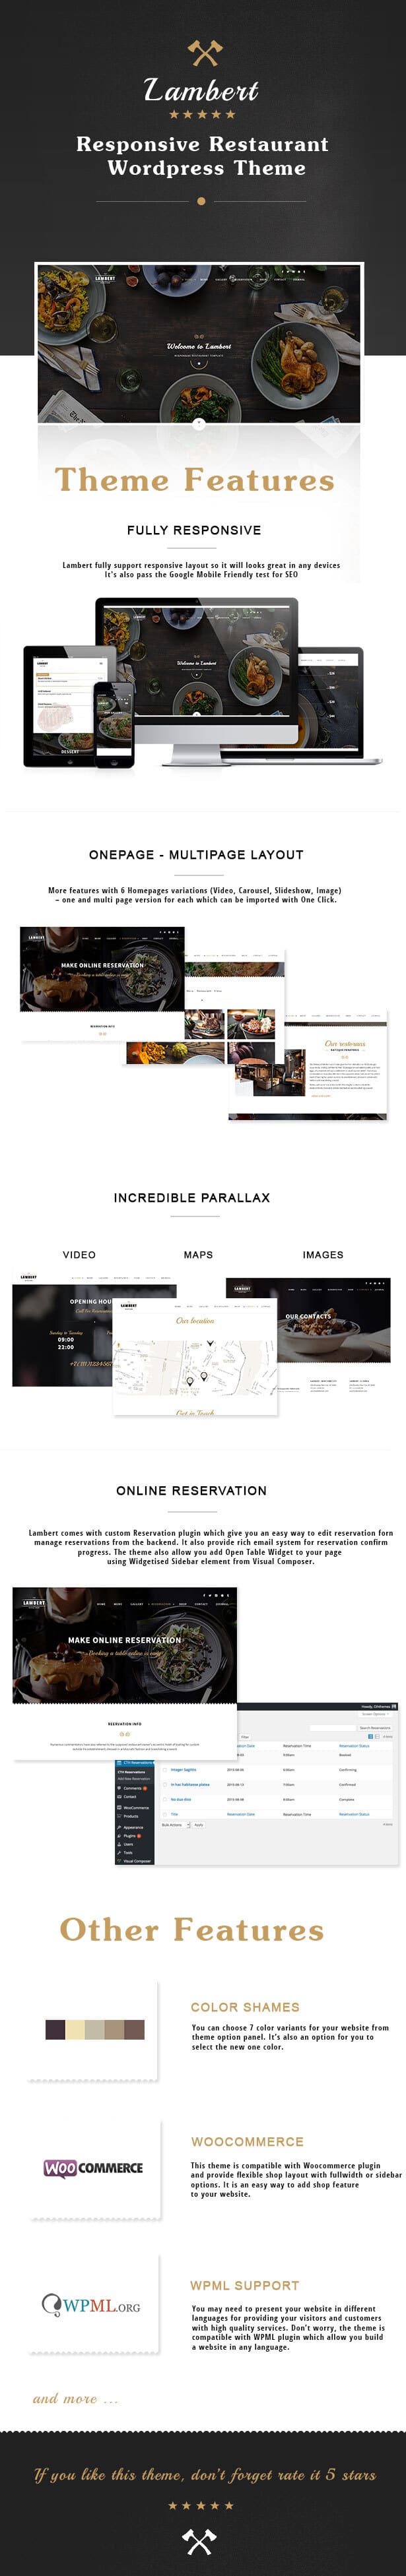 Lambert is a clean and professional WordPress theme, perfect for Restaurant, Bakery, any food business and personal chef web sites.